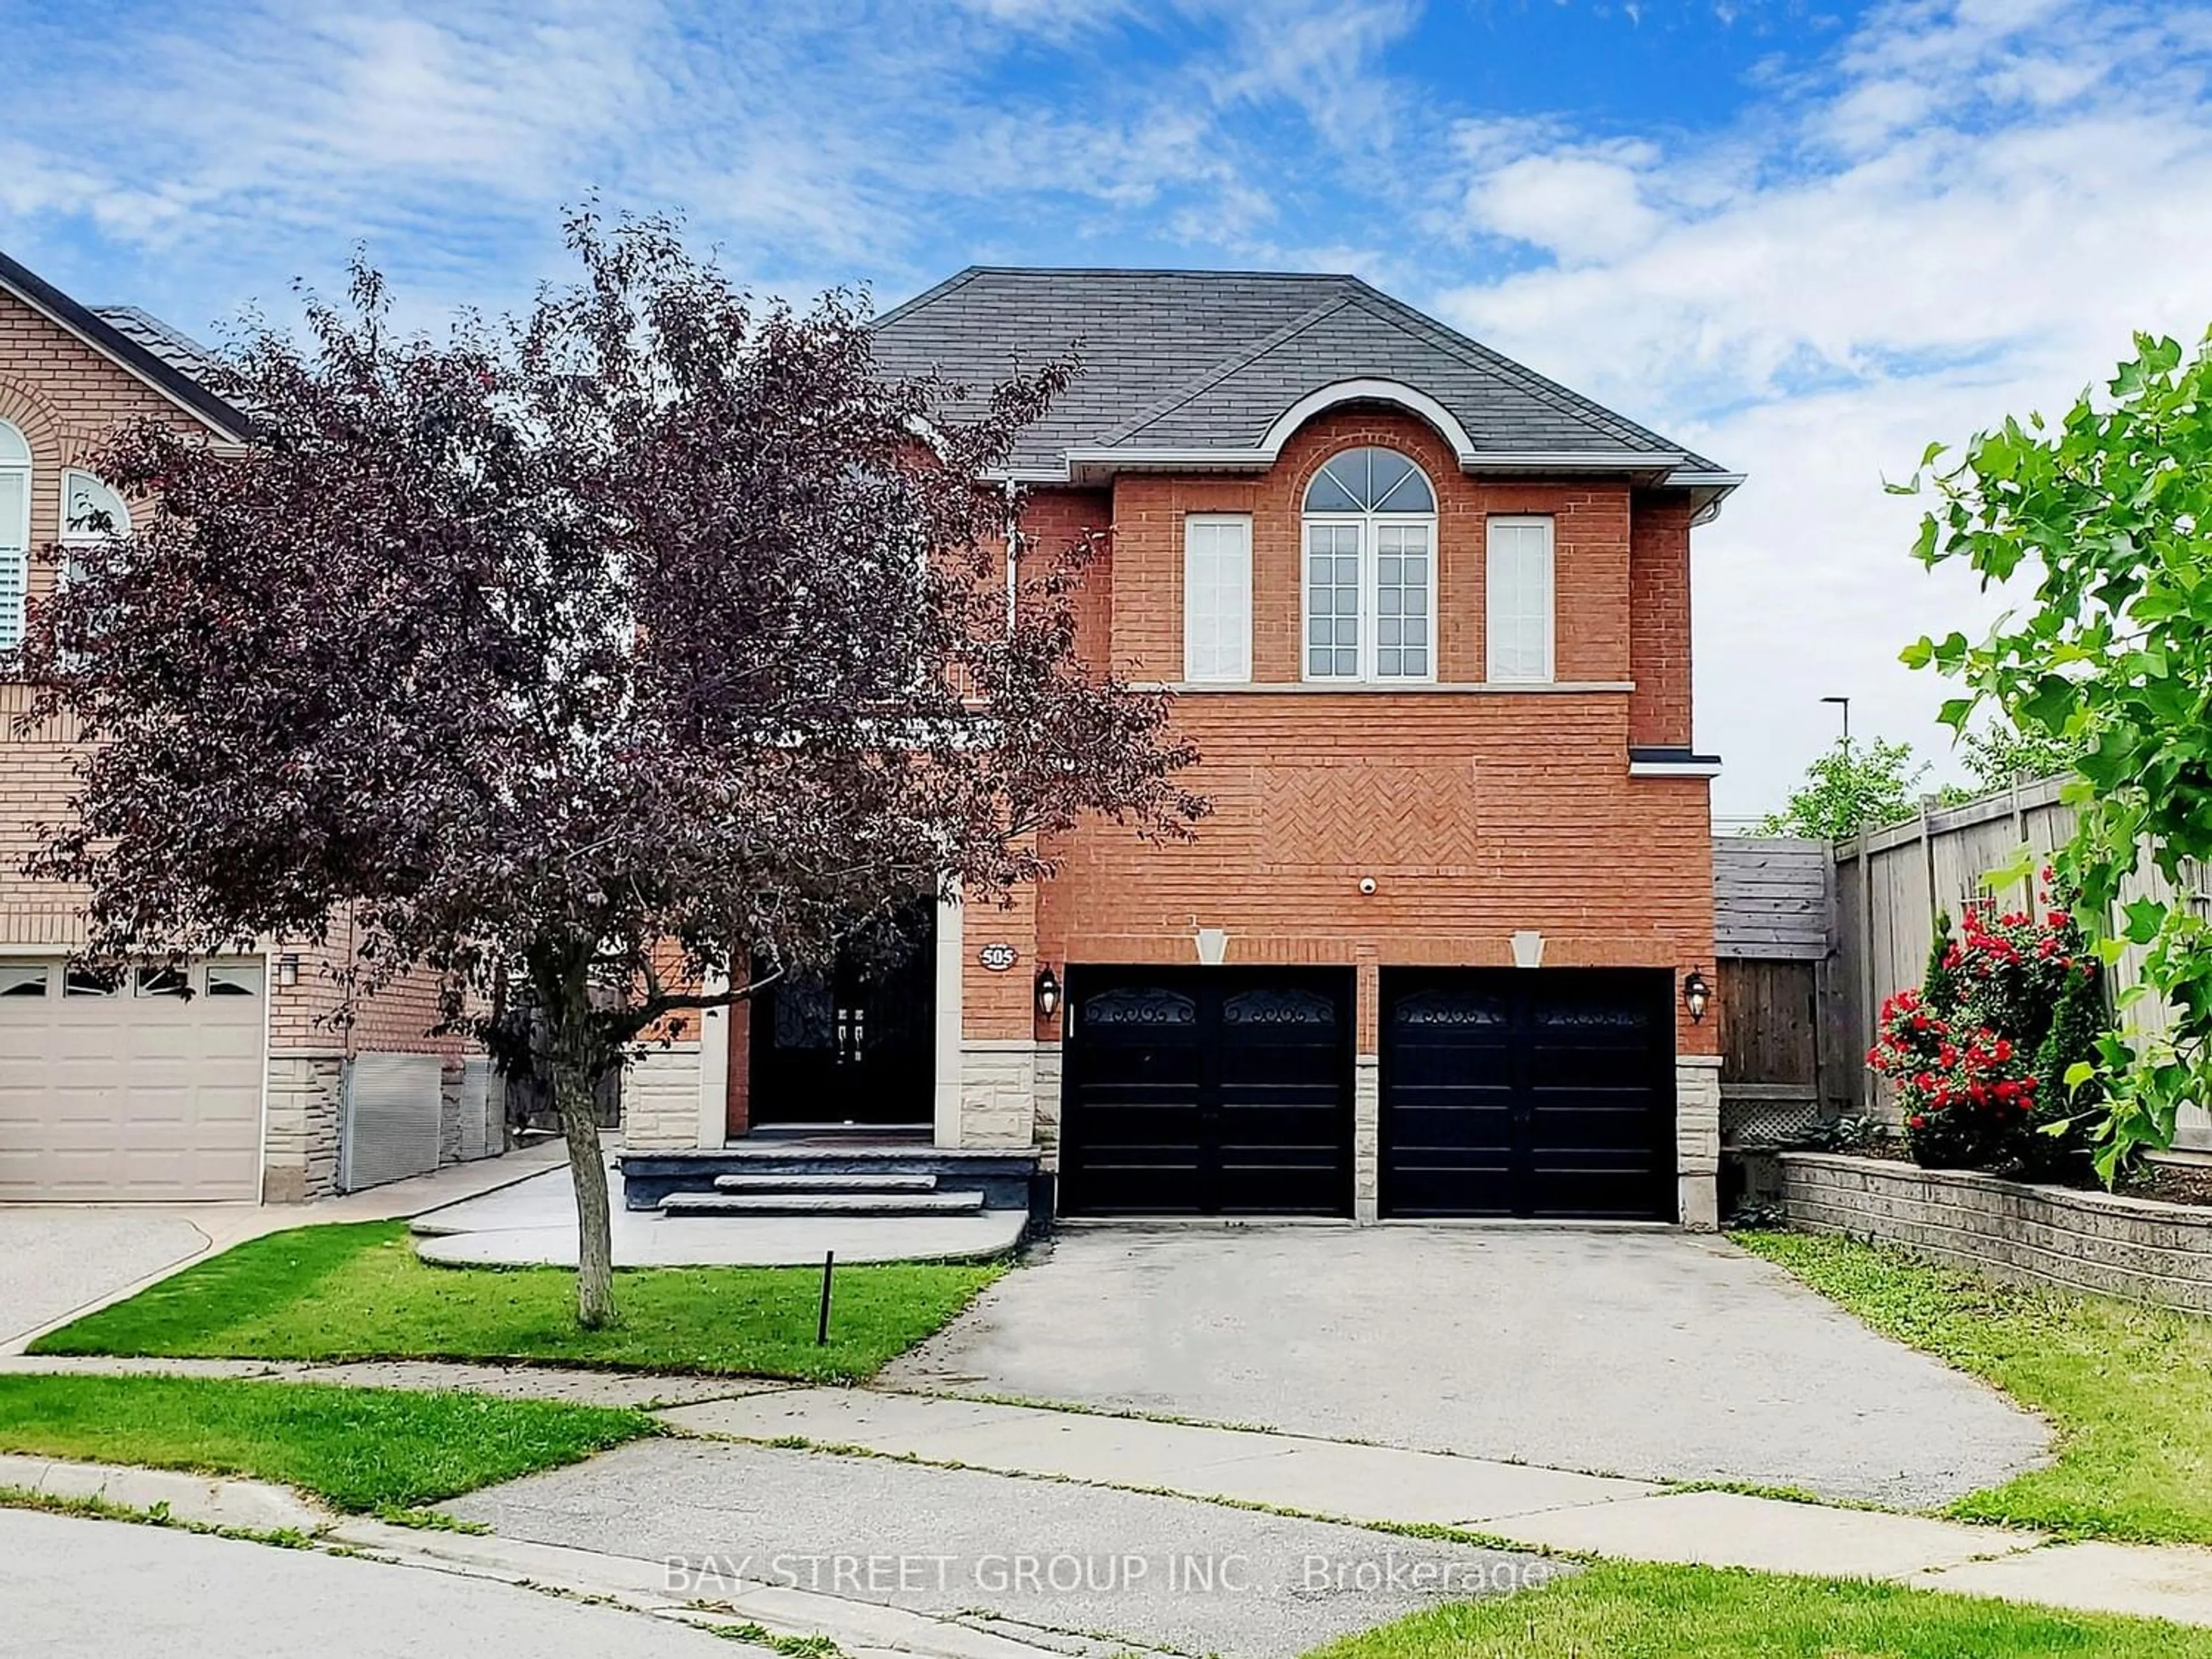 Home with brick exterior material for 505 Heath St, Oakville Ontario L6H 7M2